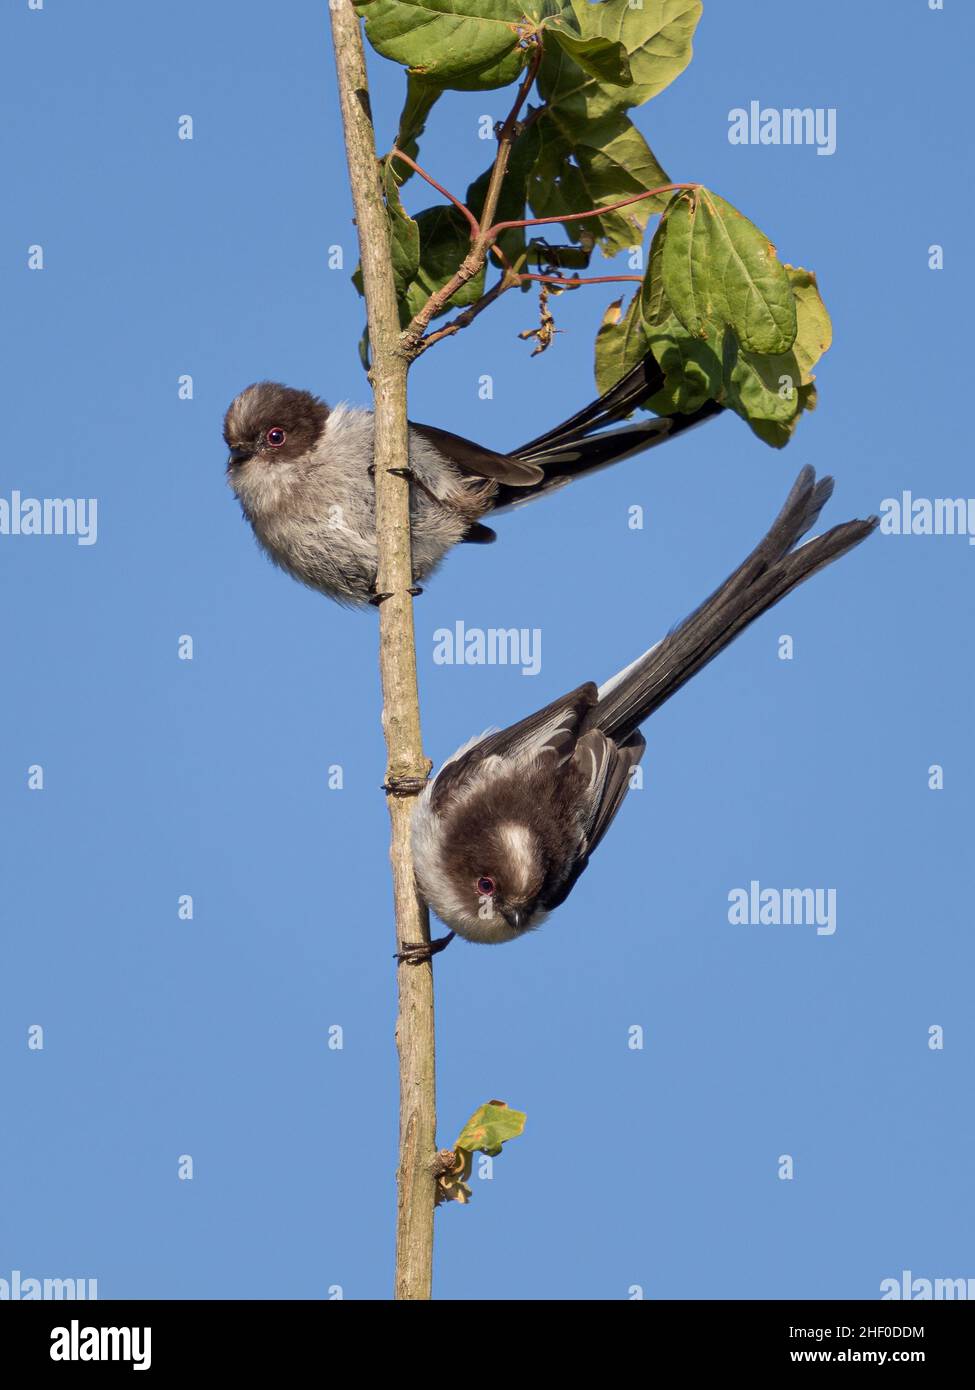 A pair of long-tailed tits (Aegithalos caudatus) seen in the Beddington Farmlands Nature Reserve in Sutton, London. Stock Photo